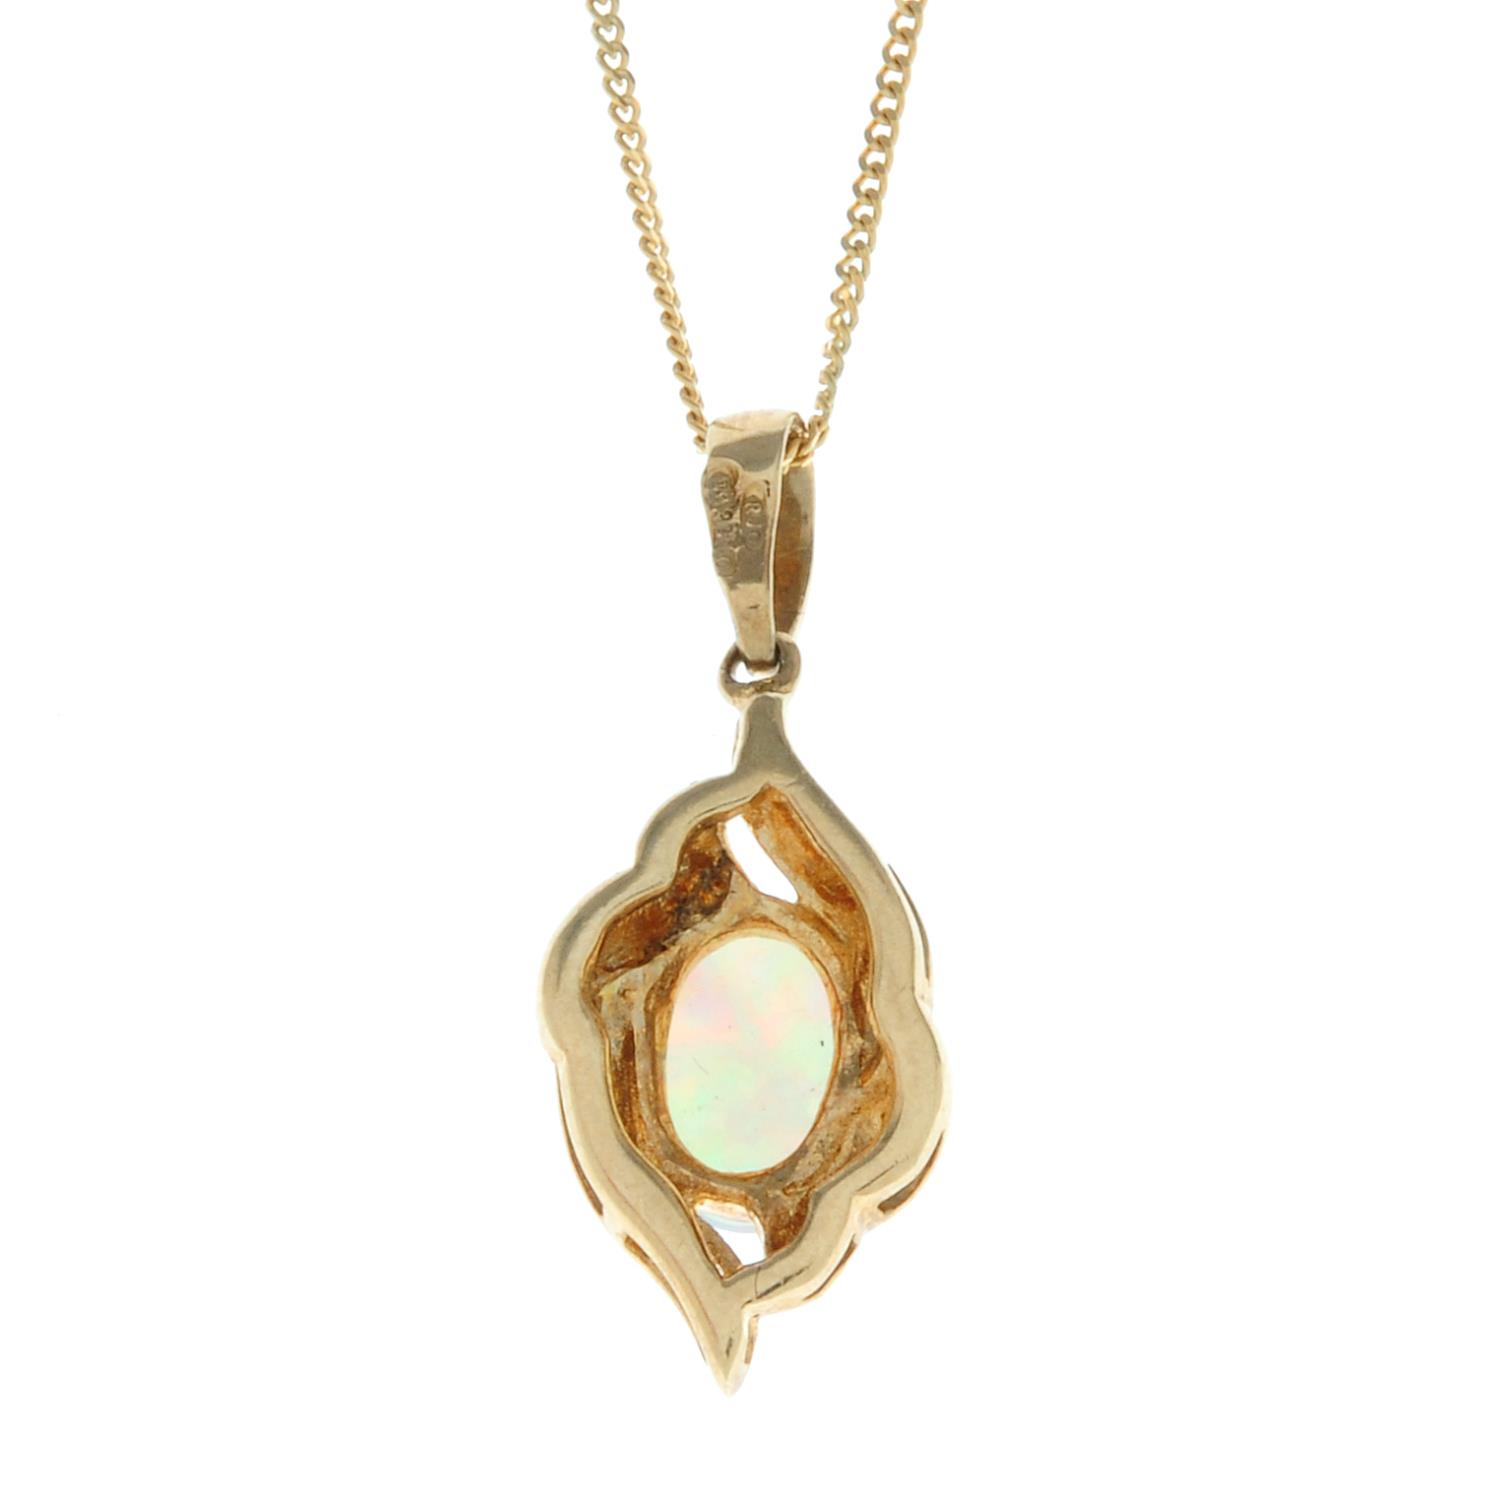 A 9ct gold opal pendant, with chain.Hallmarks for Sheffield.Length of pendant 2.1cms. - Image 2 of 3